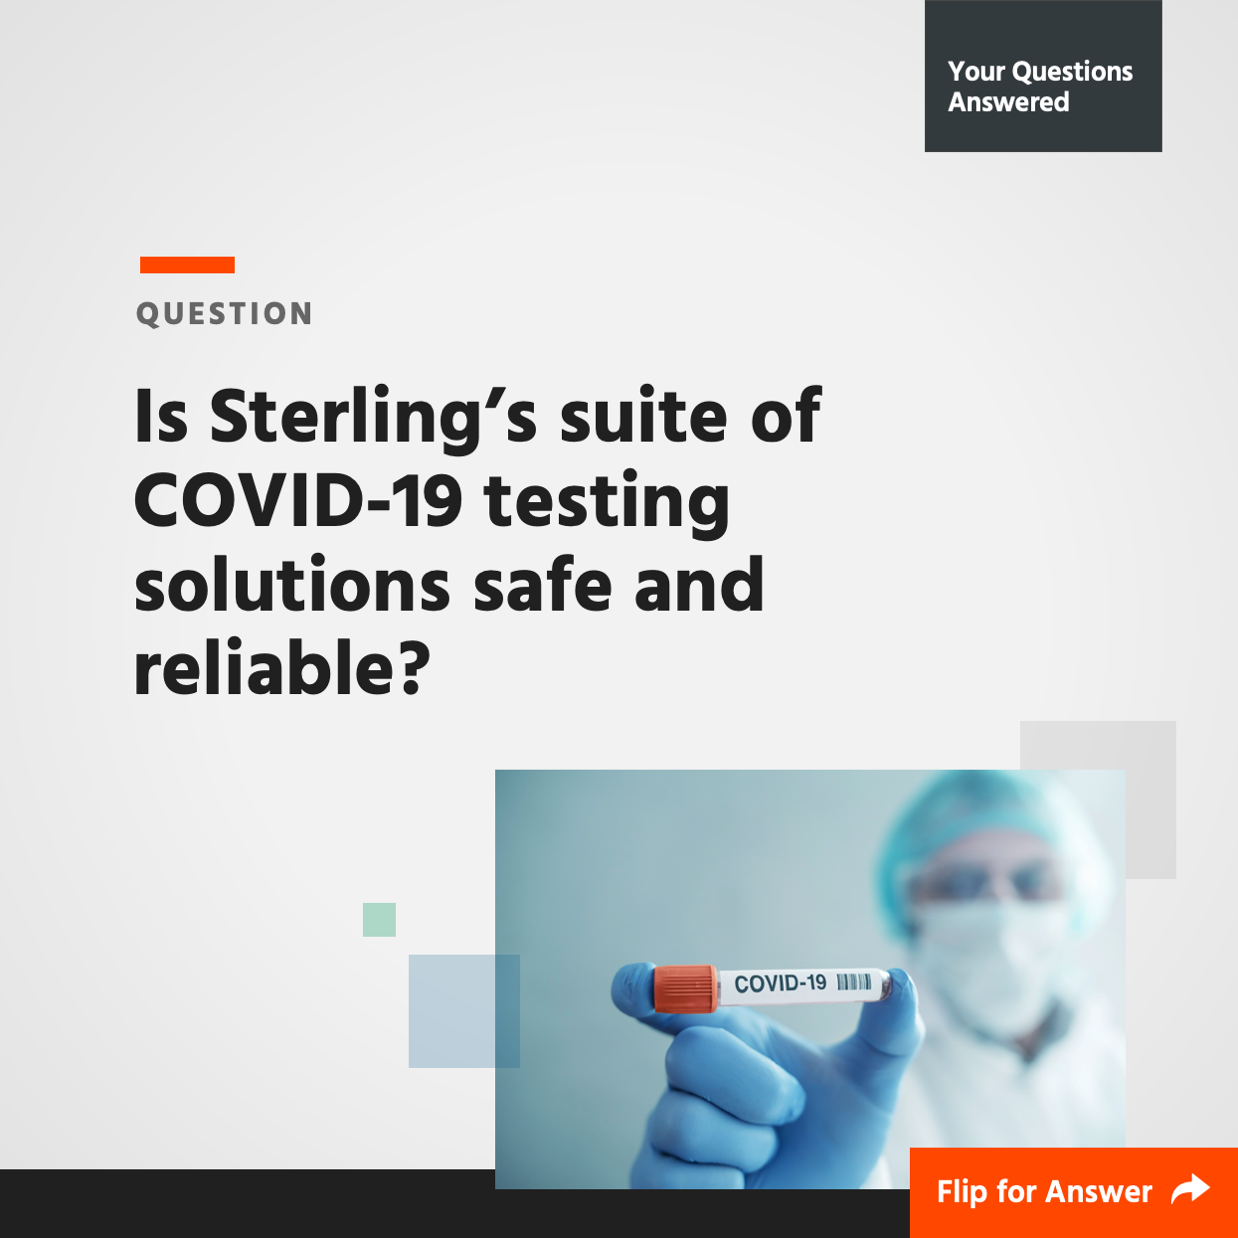 Is Sterling's suite of COVID-19 testing solutions safe and reliable?